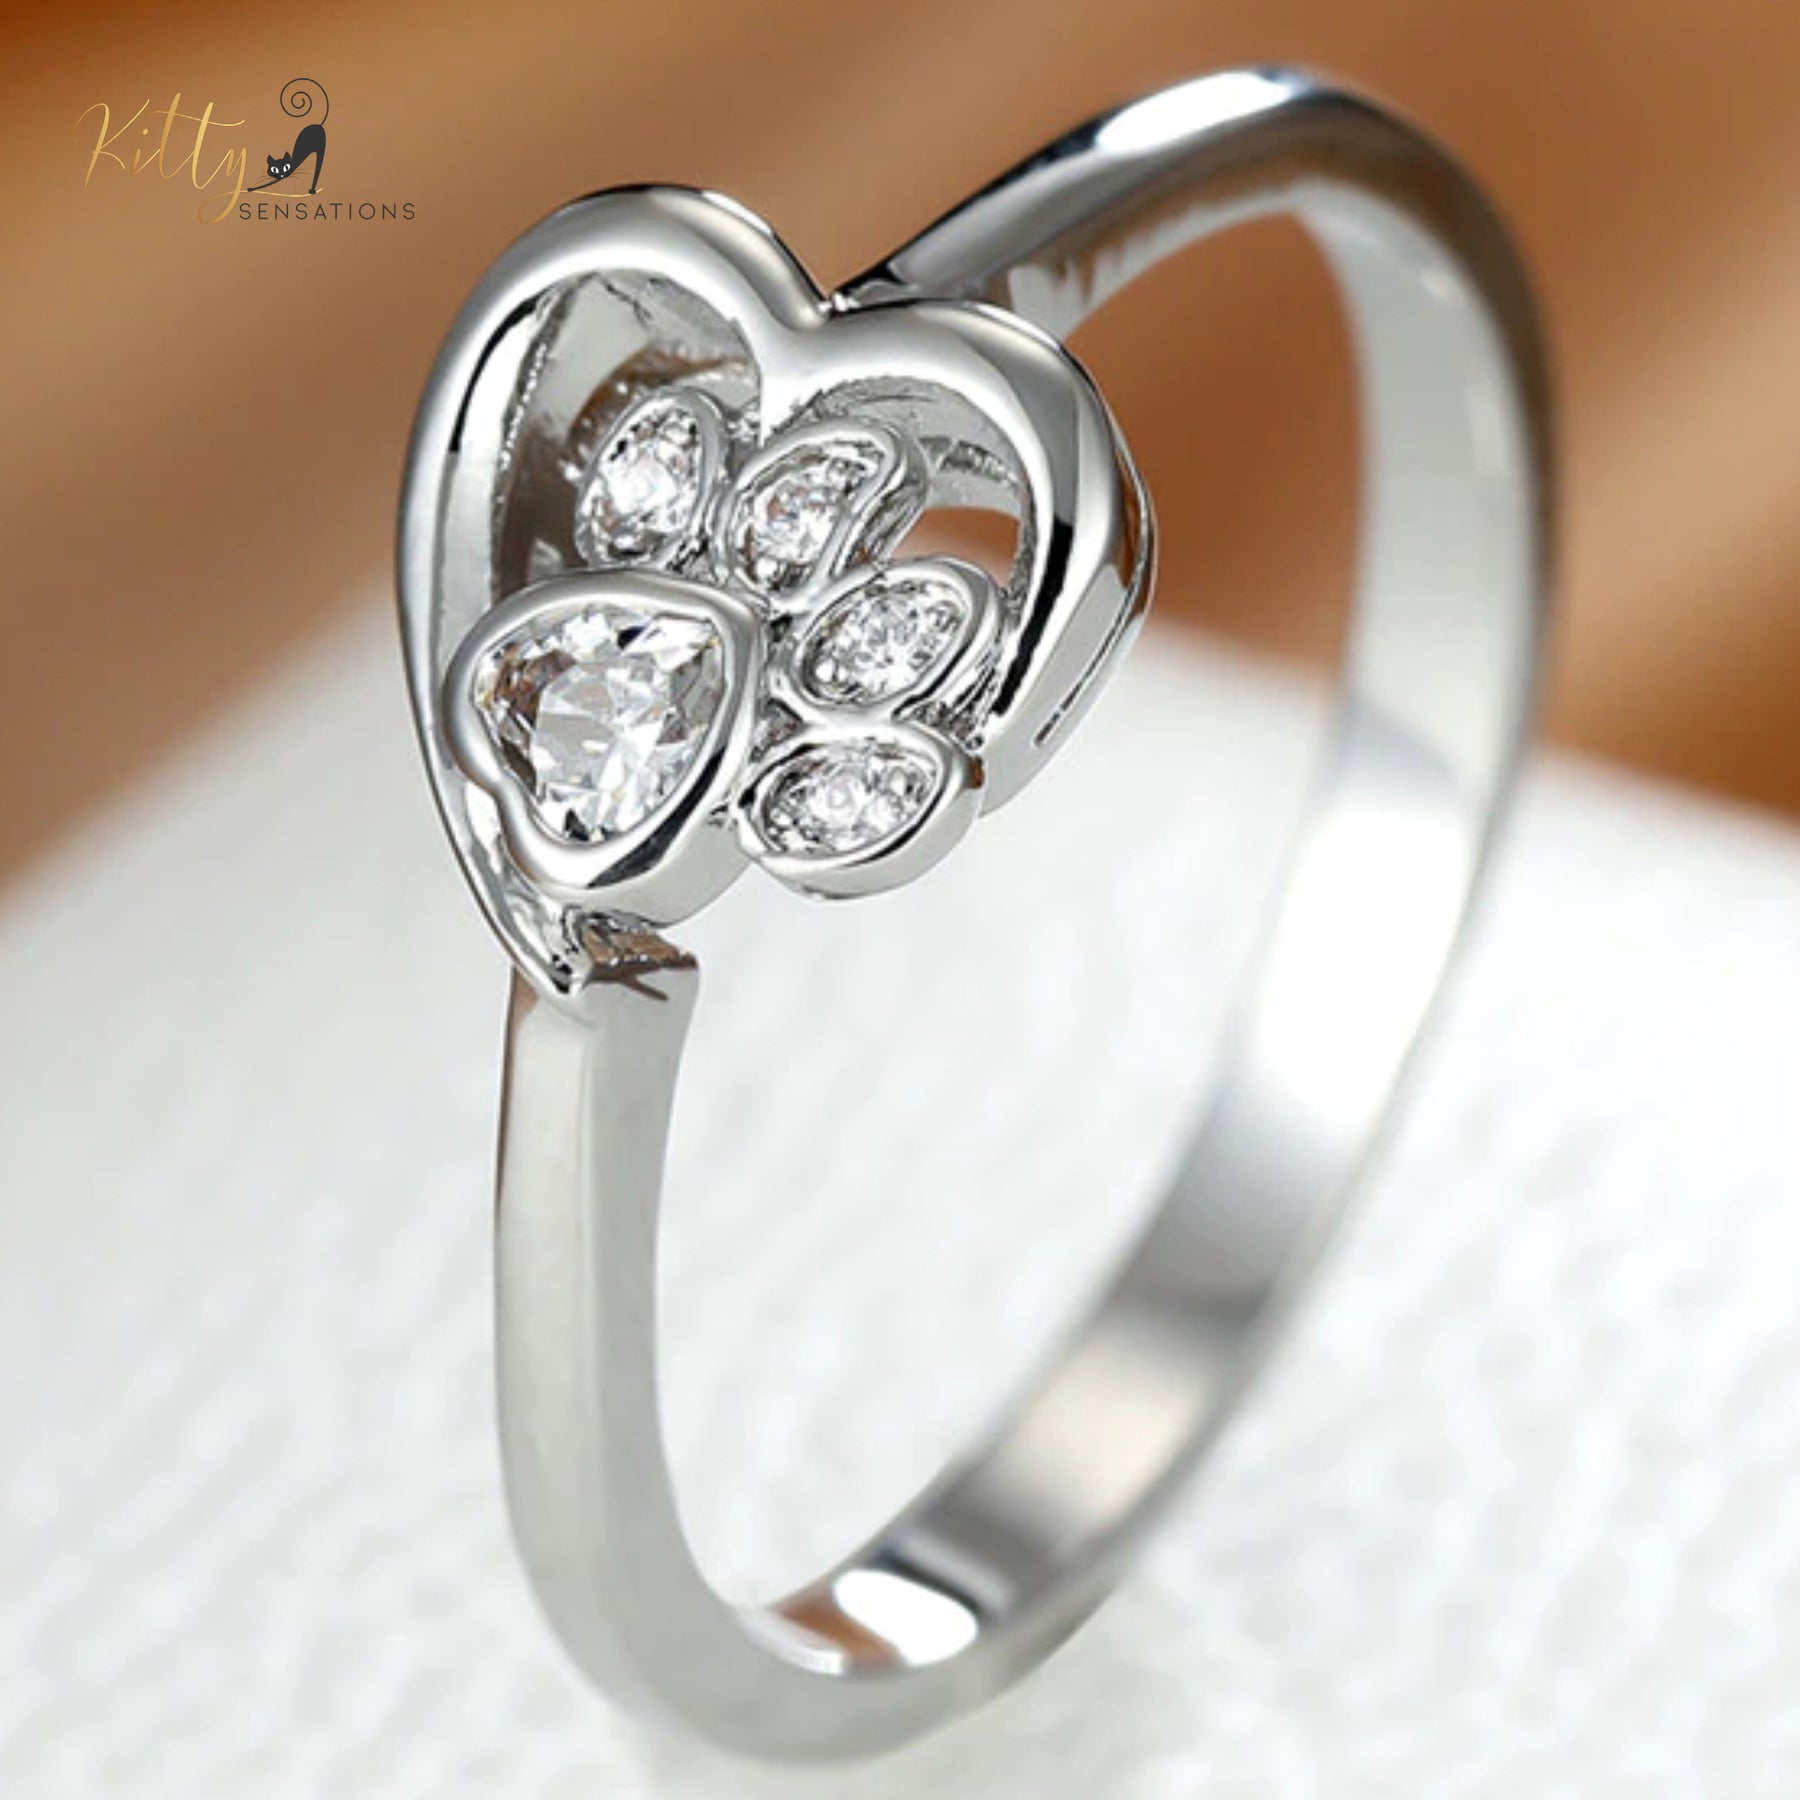 Heart Paw Cat Ring (Silver Filled)